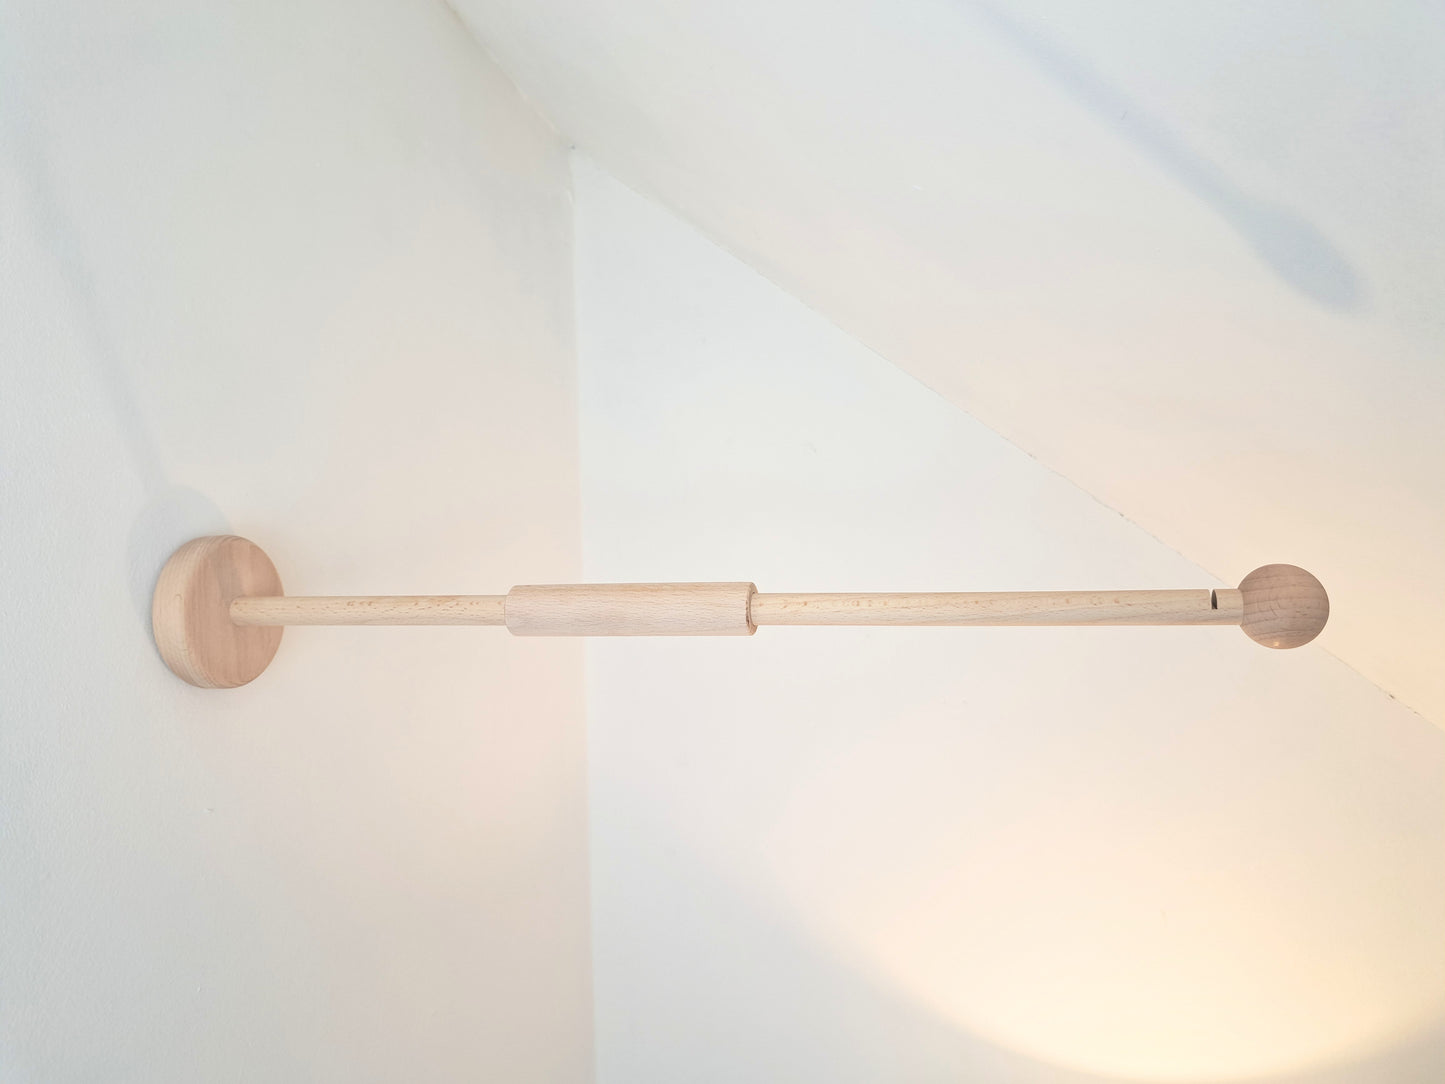 Wooden Baby Mobile Wall Bracket